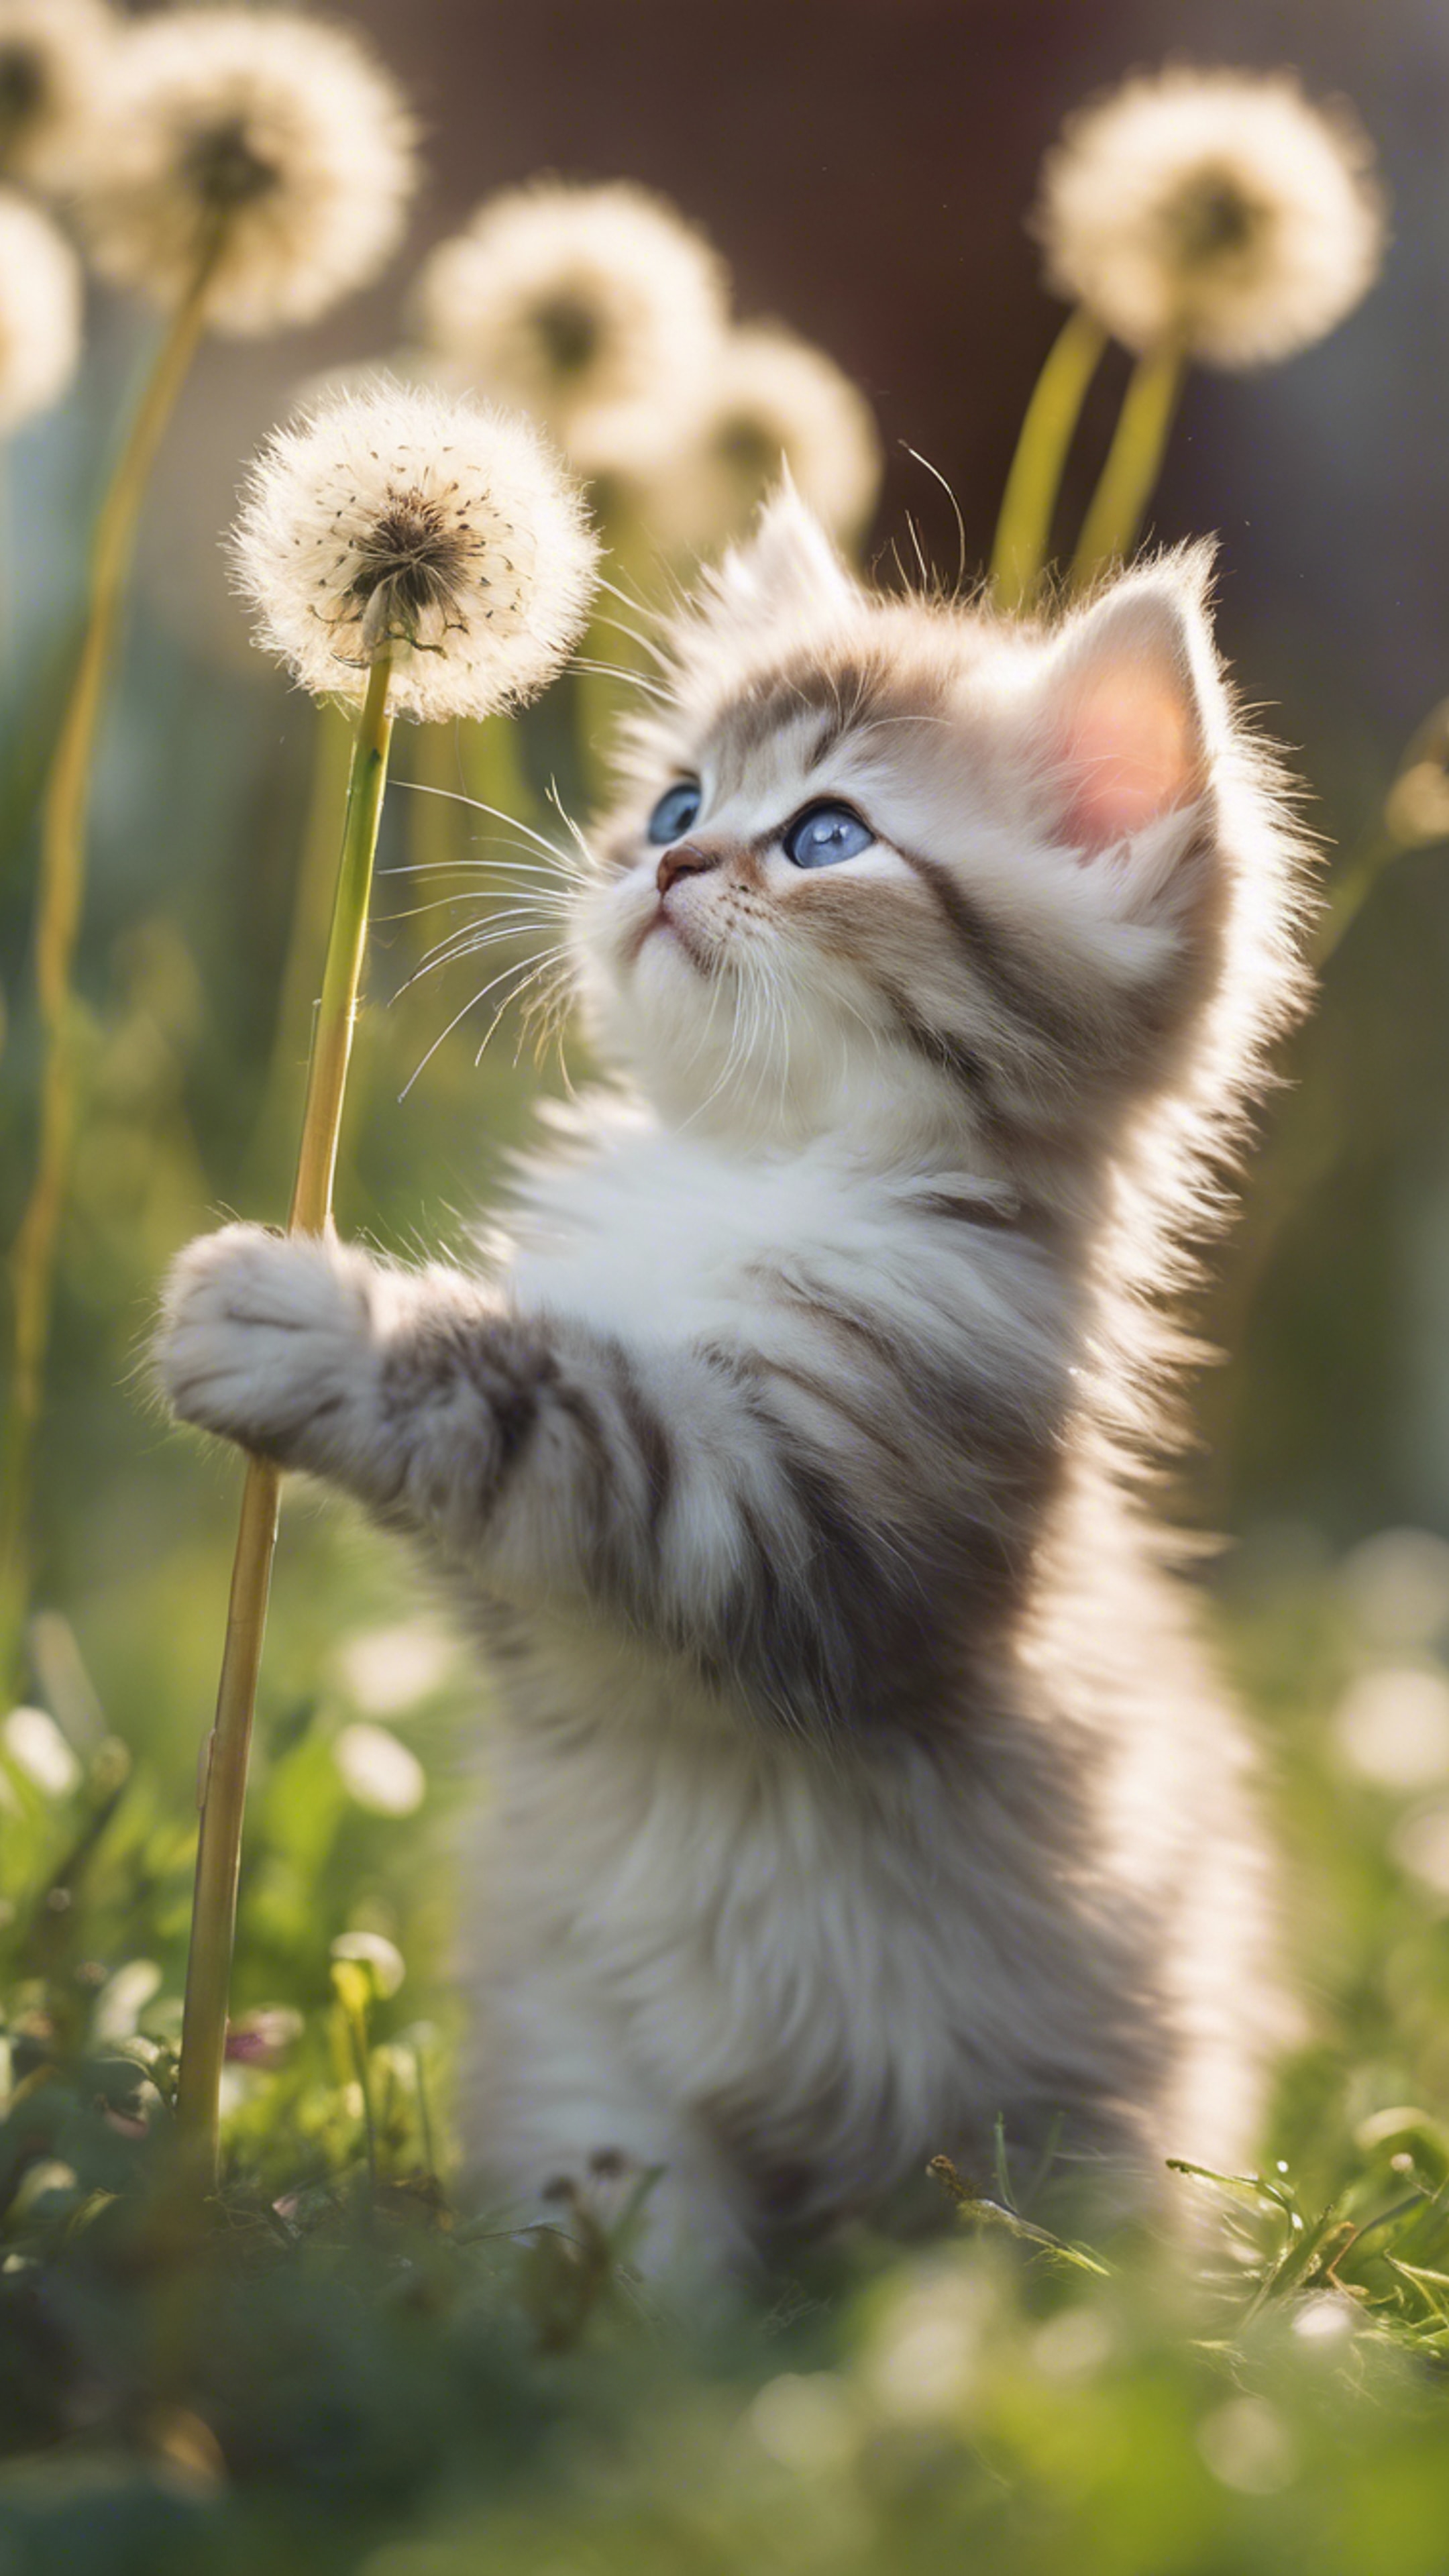 A curious Persian kitten playfully batting at a dandelishion puff in the midst of spring bloom. טפט[a1f5779e66044a4f83a1]